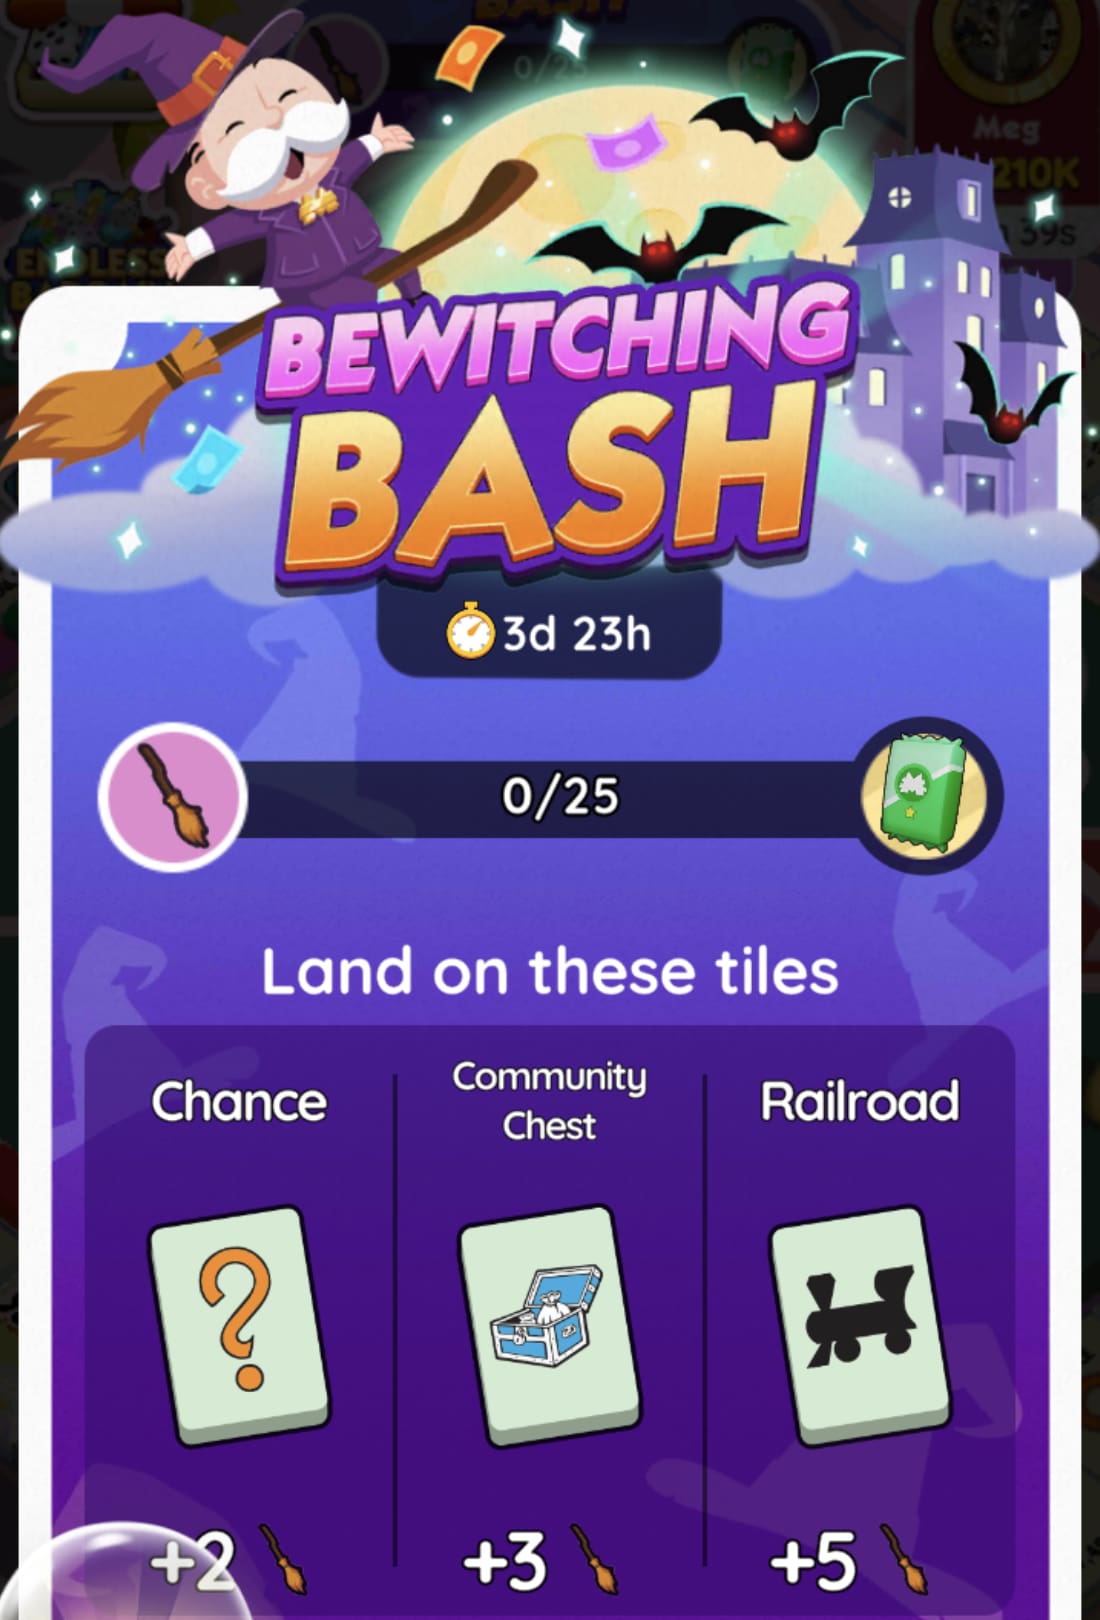 Flash event list. Mega heist at 3AM PDT and Wheel Boost at 12PM PDT :  r/Monopoly_GO